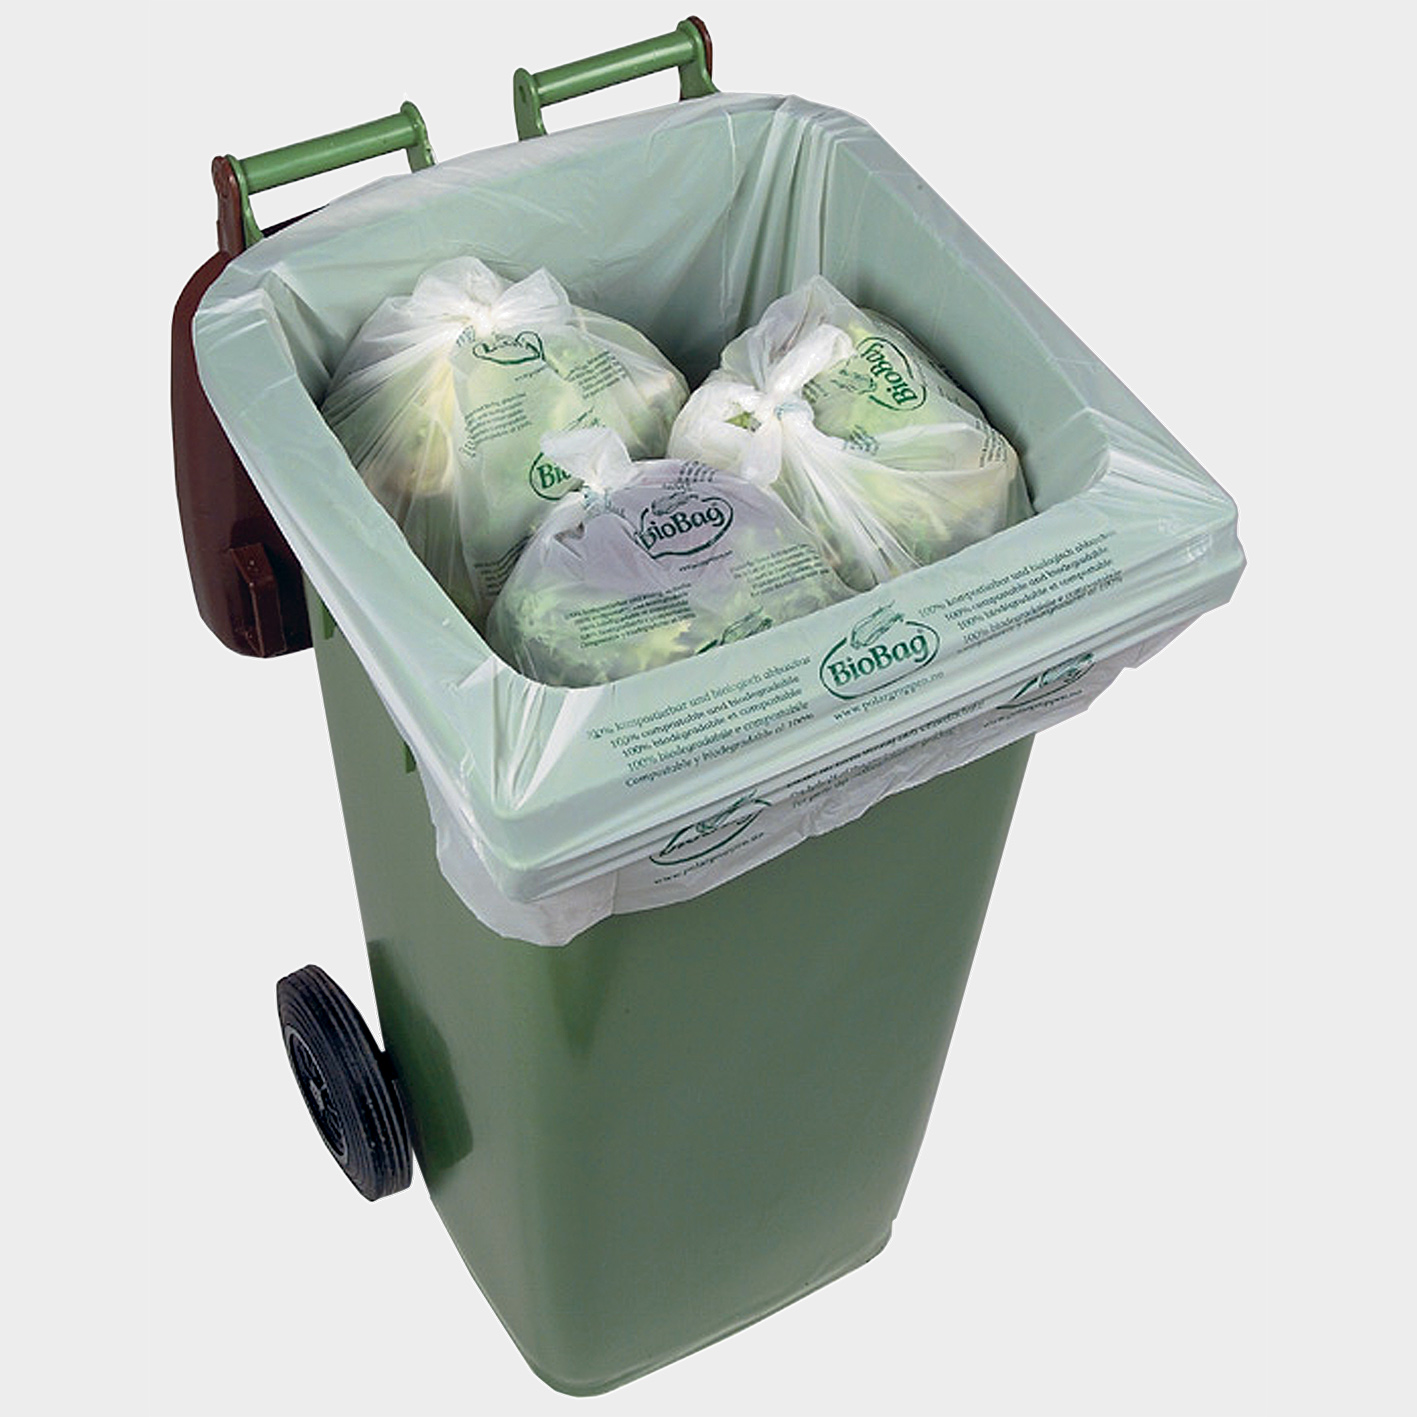 degradable recyclable compostable bin